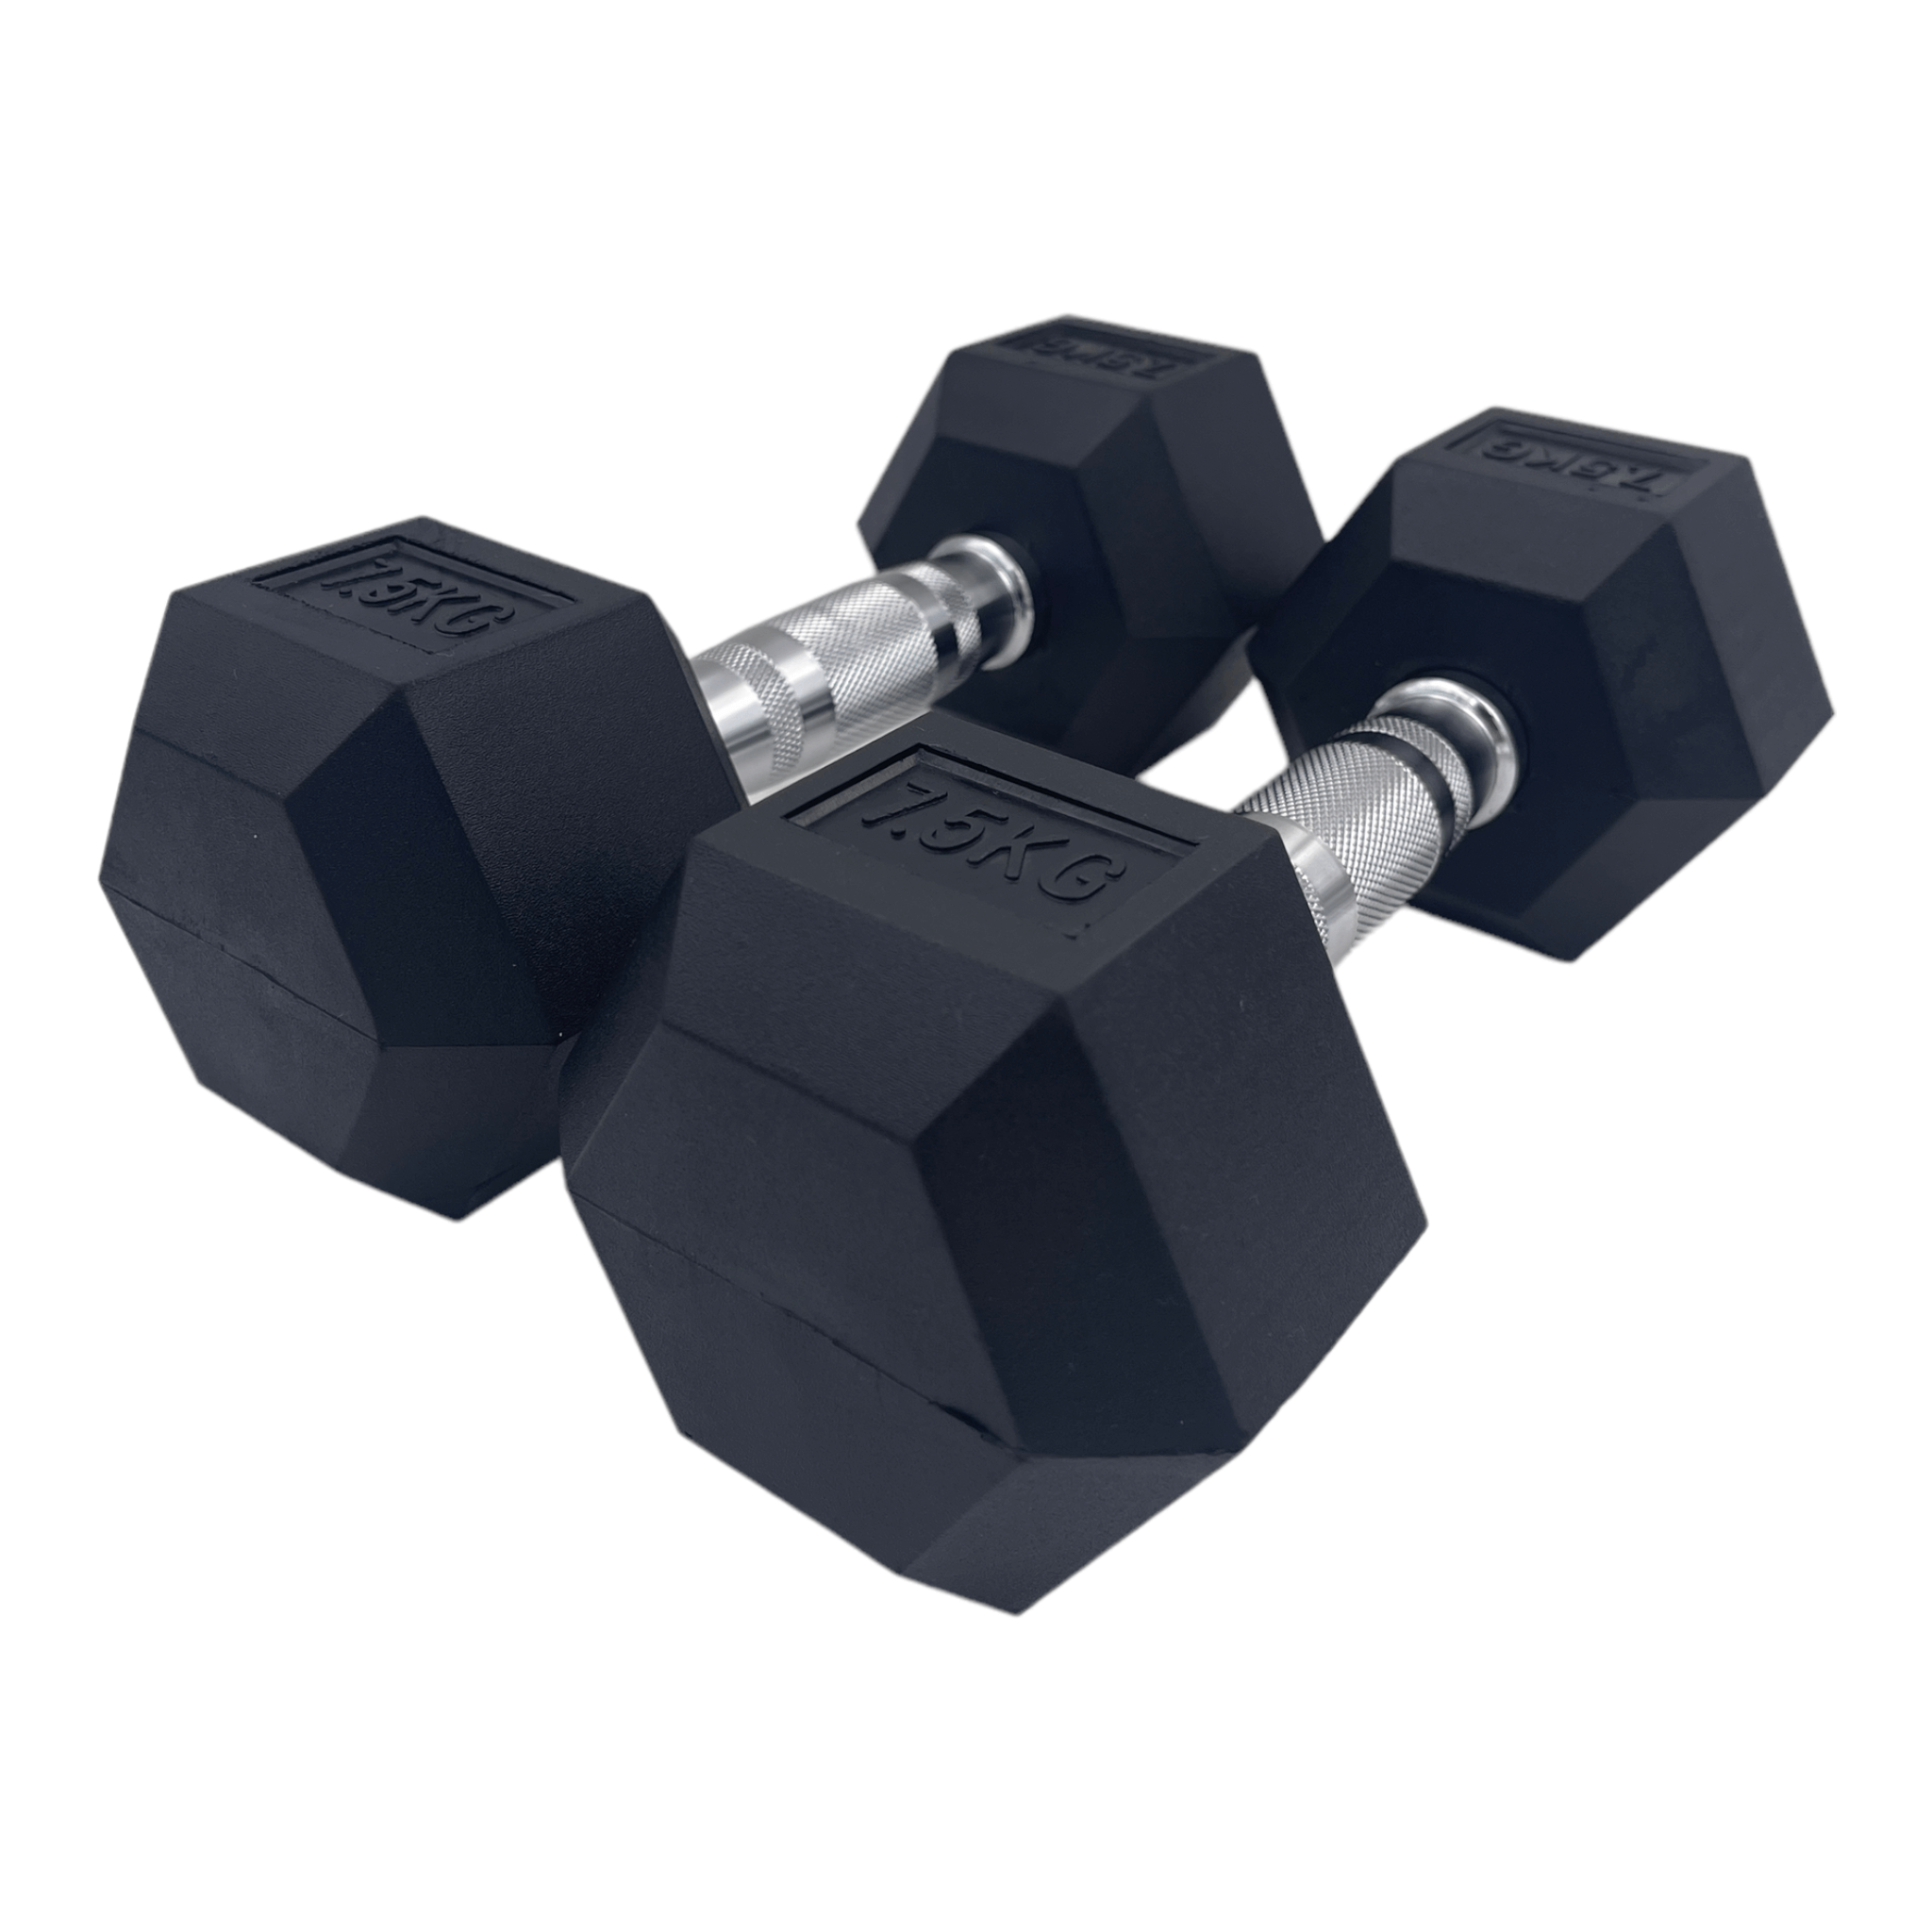 5kg to 20kg Rubber Hex Dumbbell Package (7 pairs) | INSOURCE